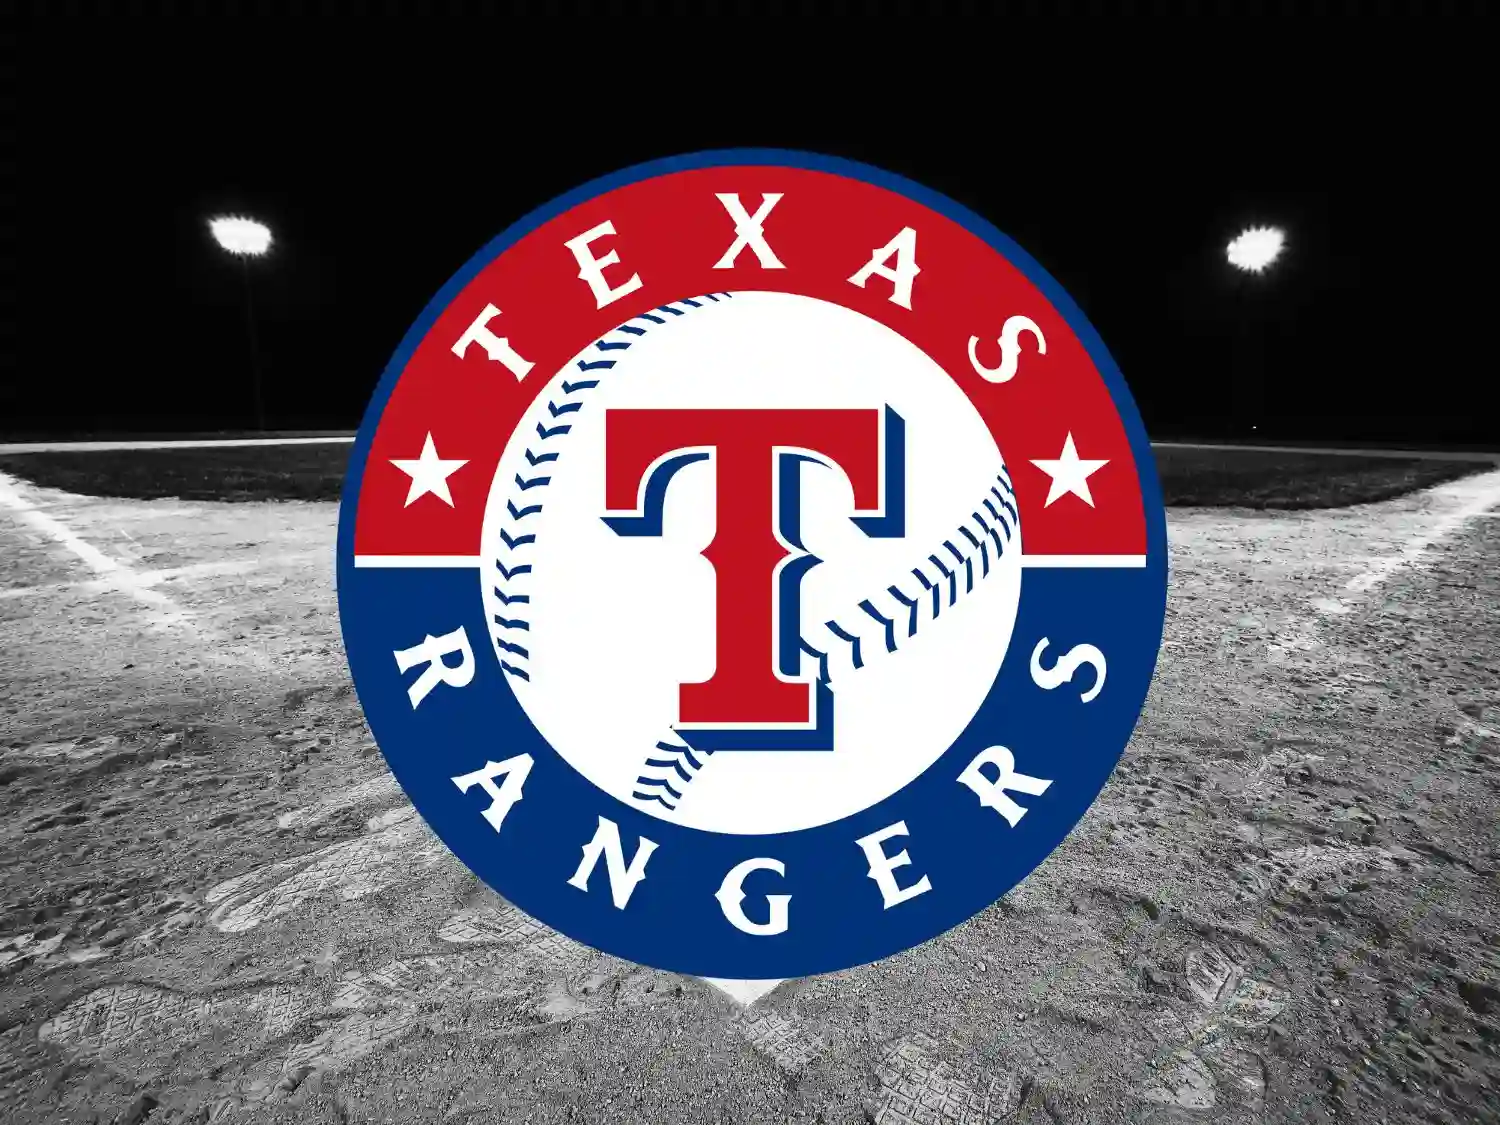 Texas Rangers Tickets and Seats